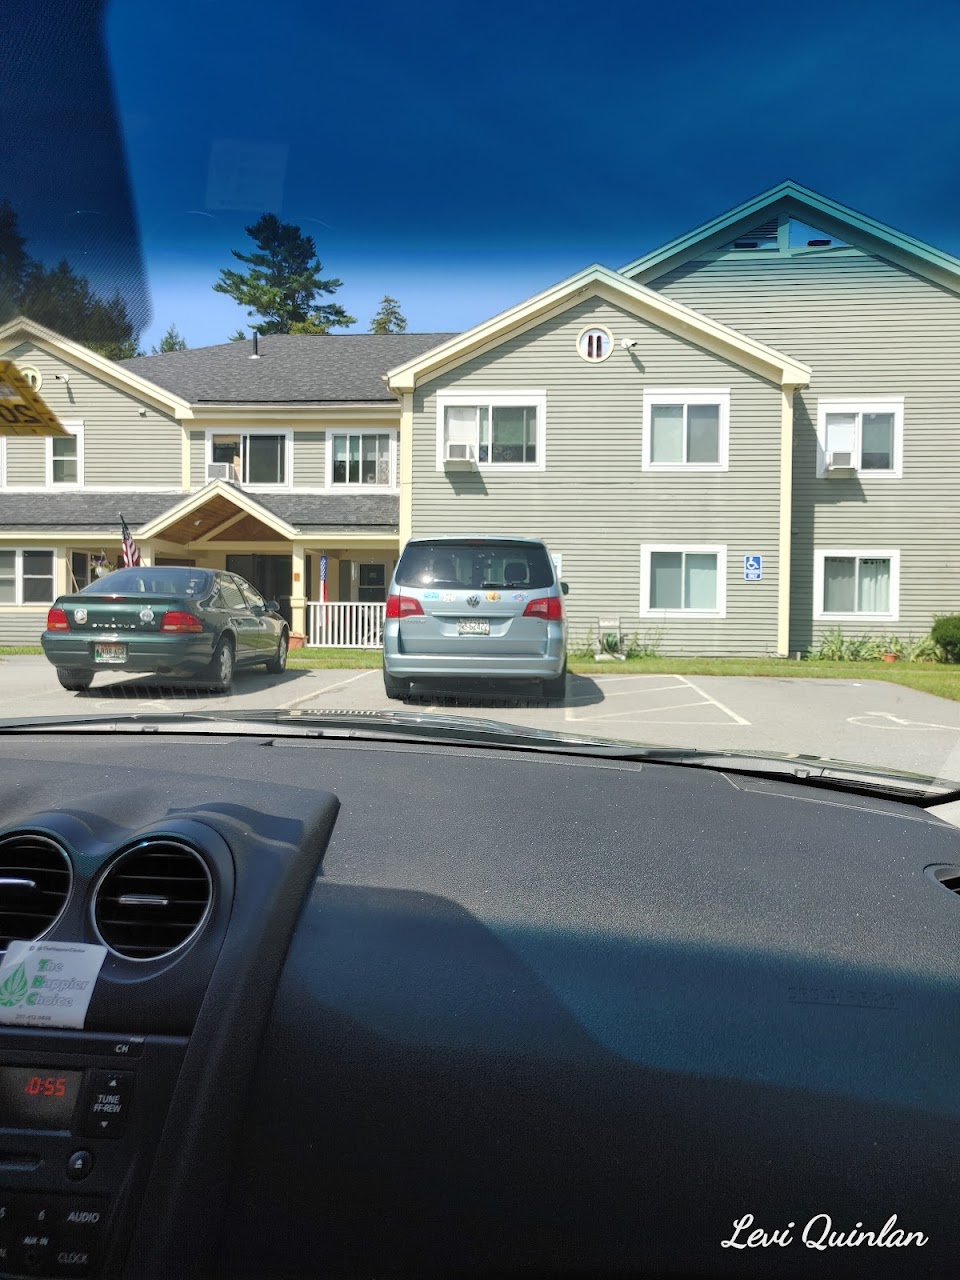 Photo of HOLDAN SQUARE APTS. Affordable housing located at  BREWER, ME 